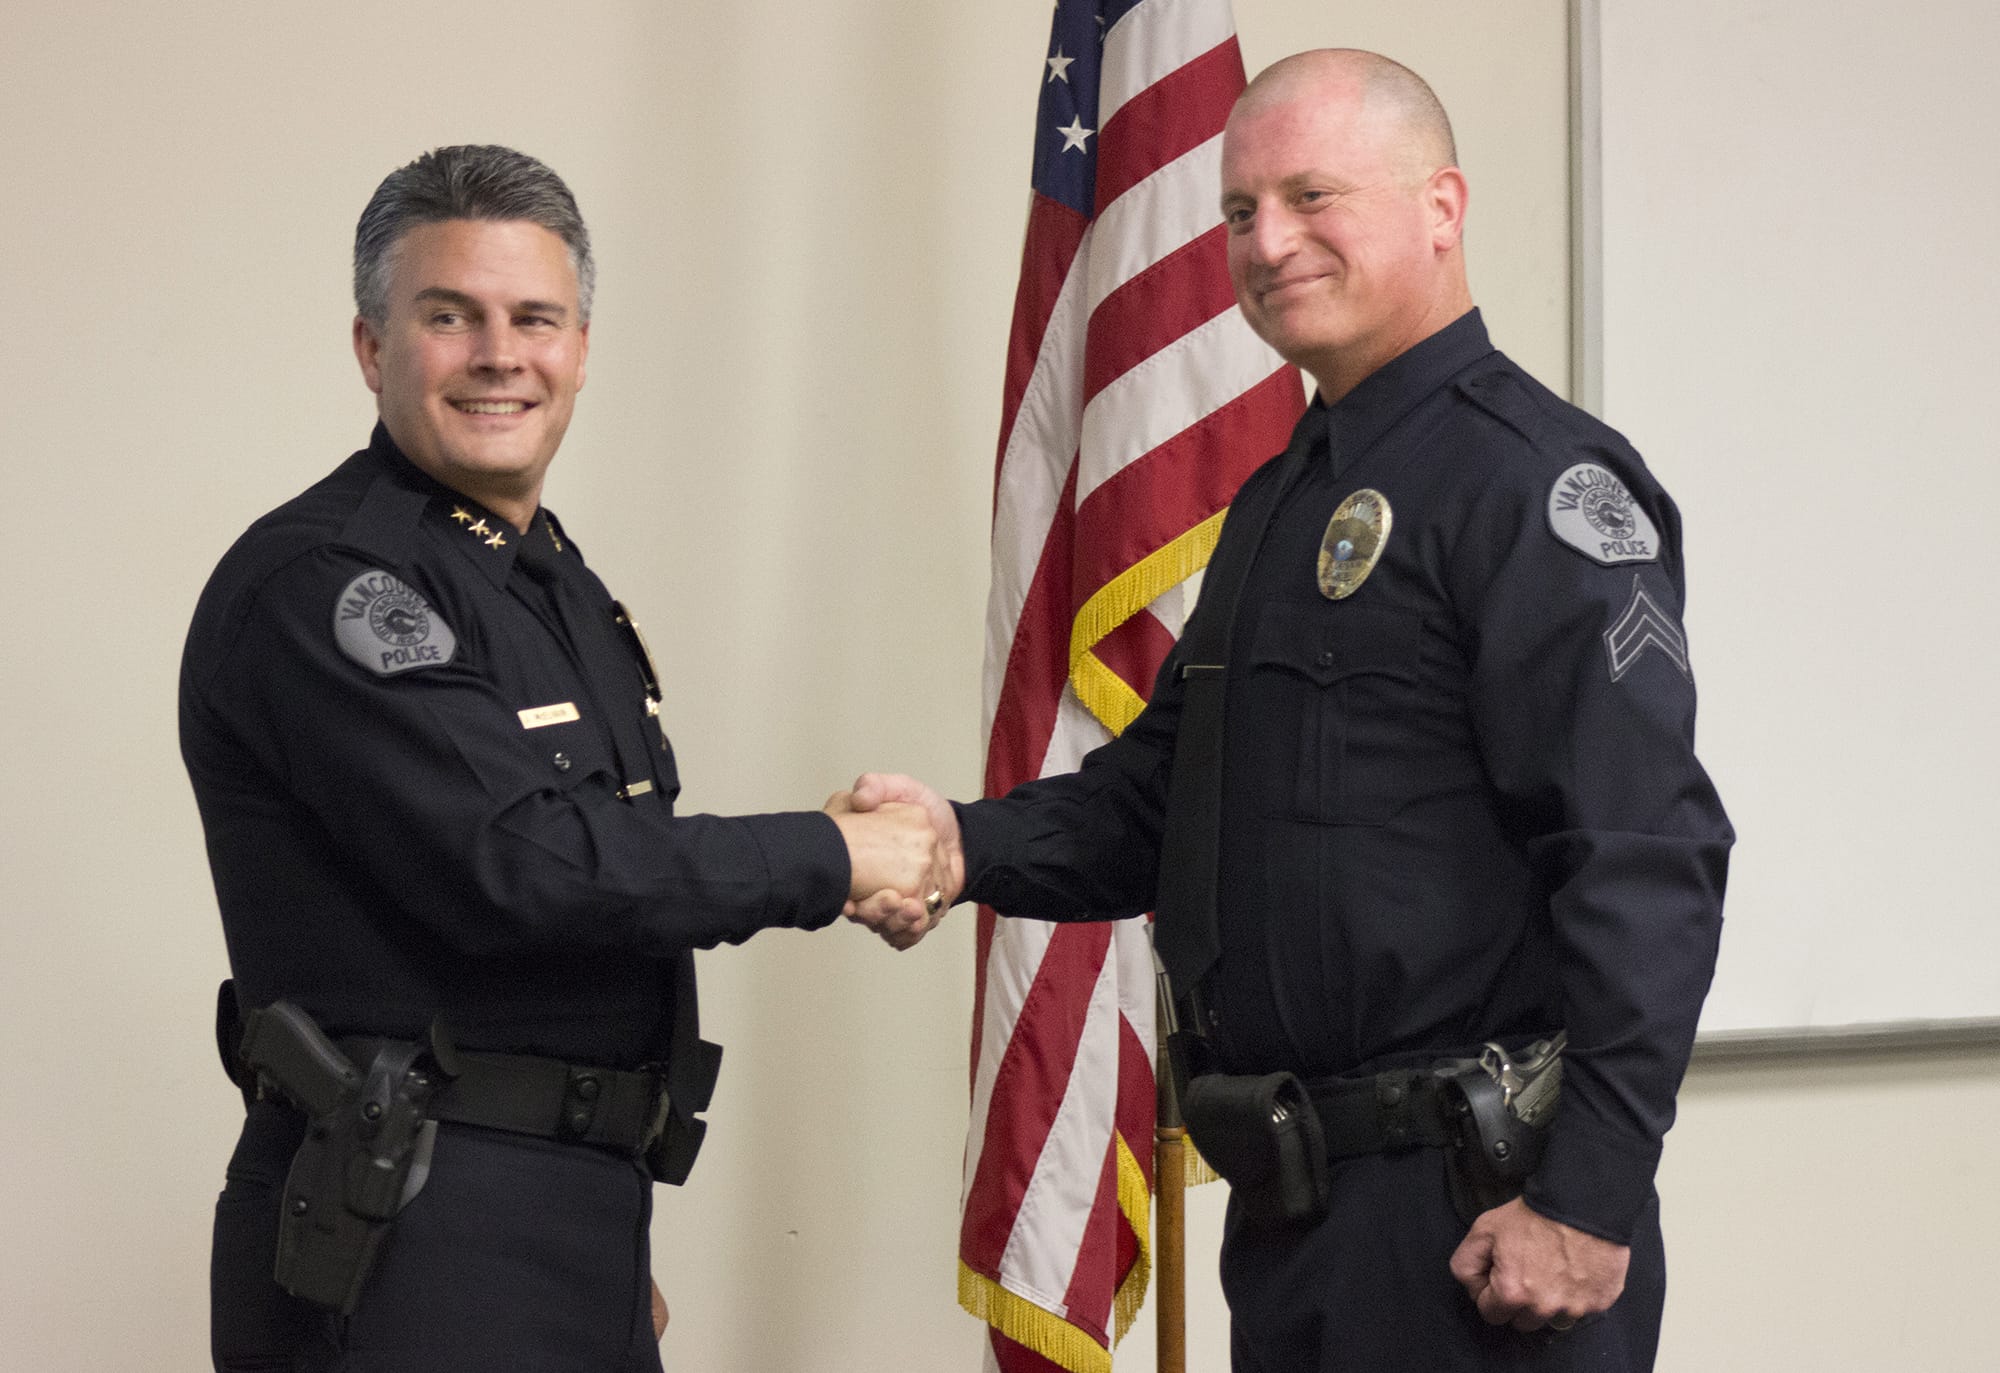 Vancouver Police Chief James McElvain, left, and Cpl. Aaron Gibson pose for a picture after Gibson's promotion ceremony Friday at the department's west precinct. Gibson was fired in 1997 for leaving explosives behind at a training site, but won his job back through arbitration.